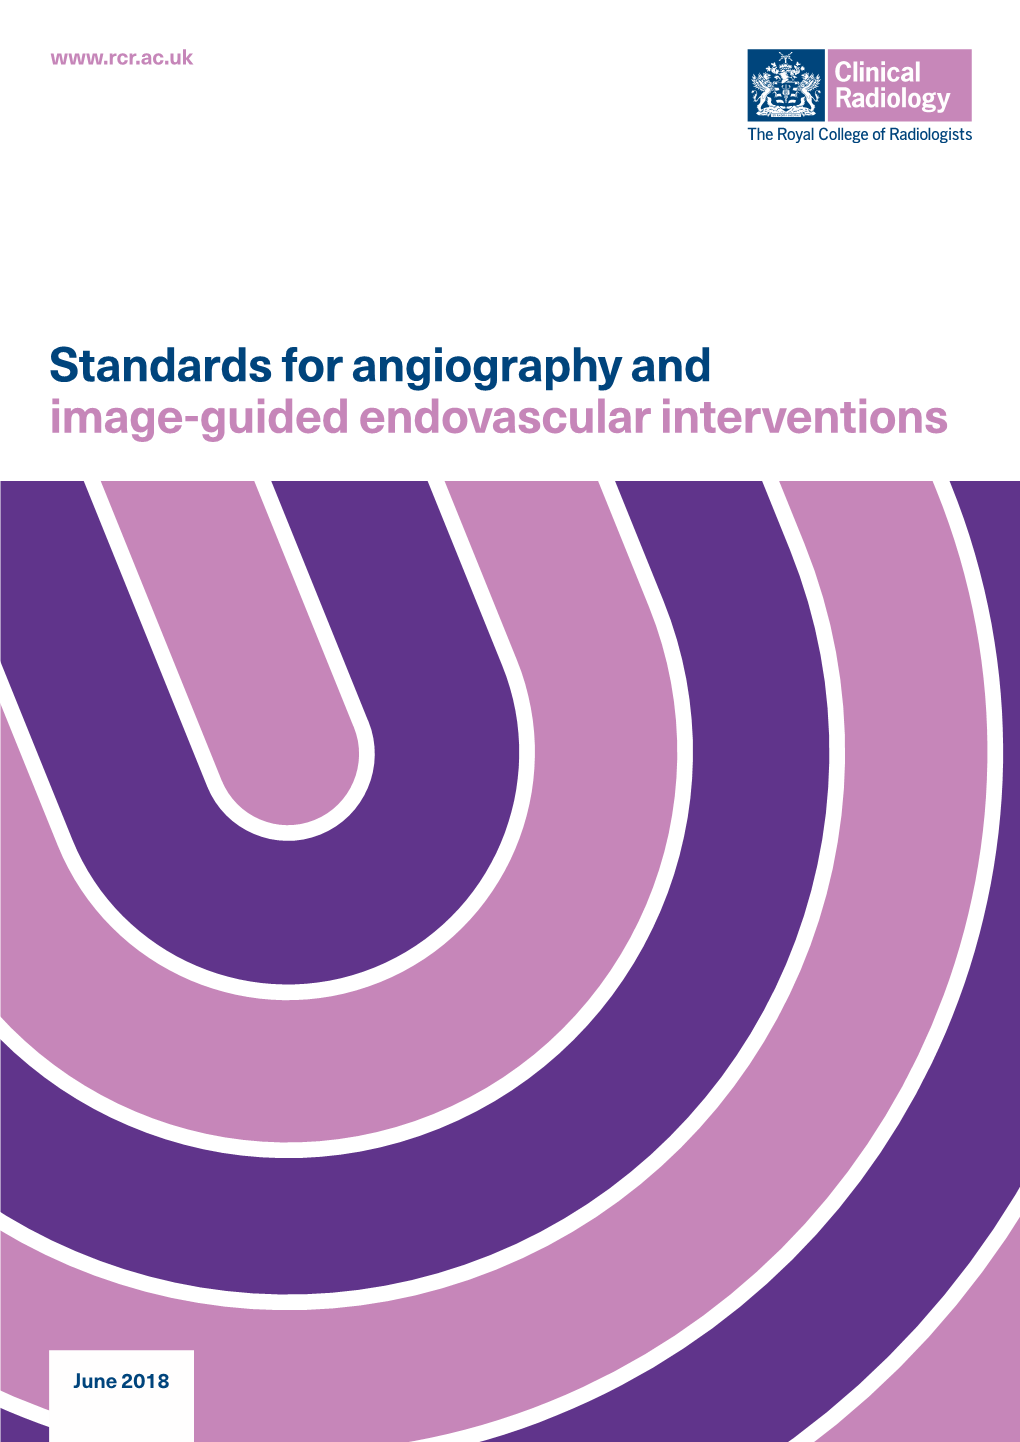 Standards for Angiography and Image-Guided Endovascular Interventions